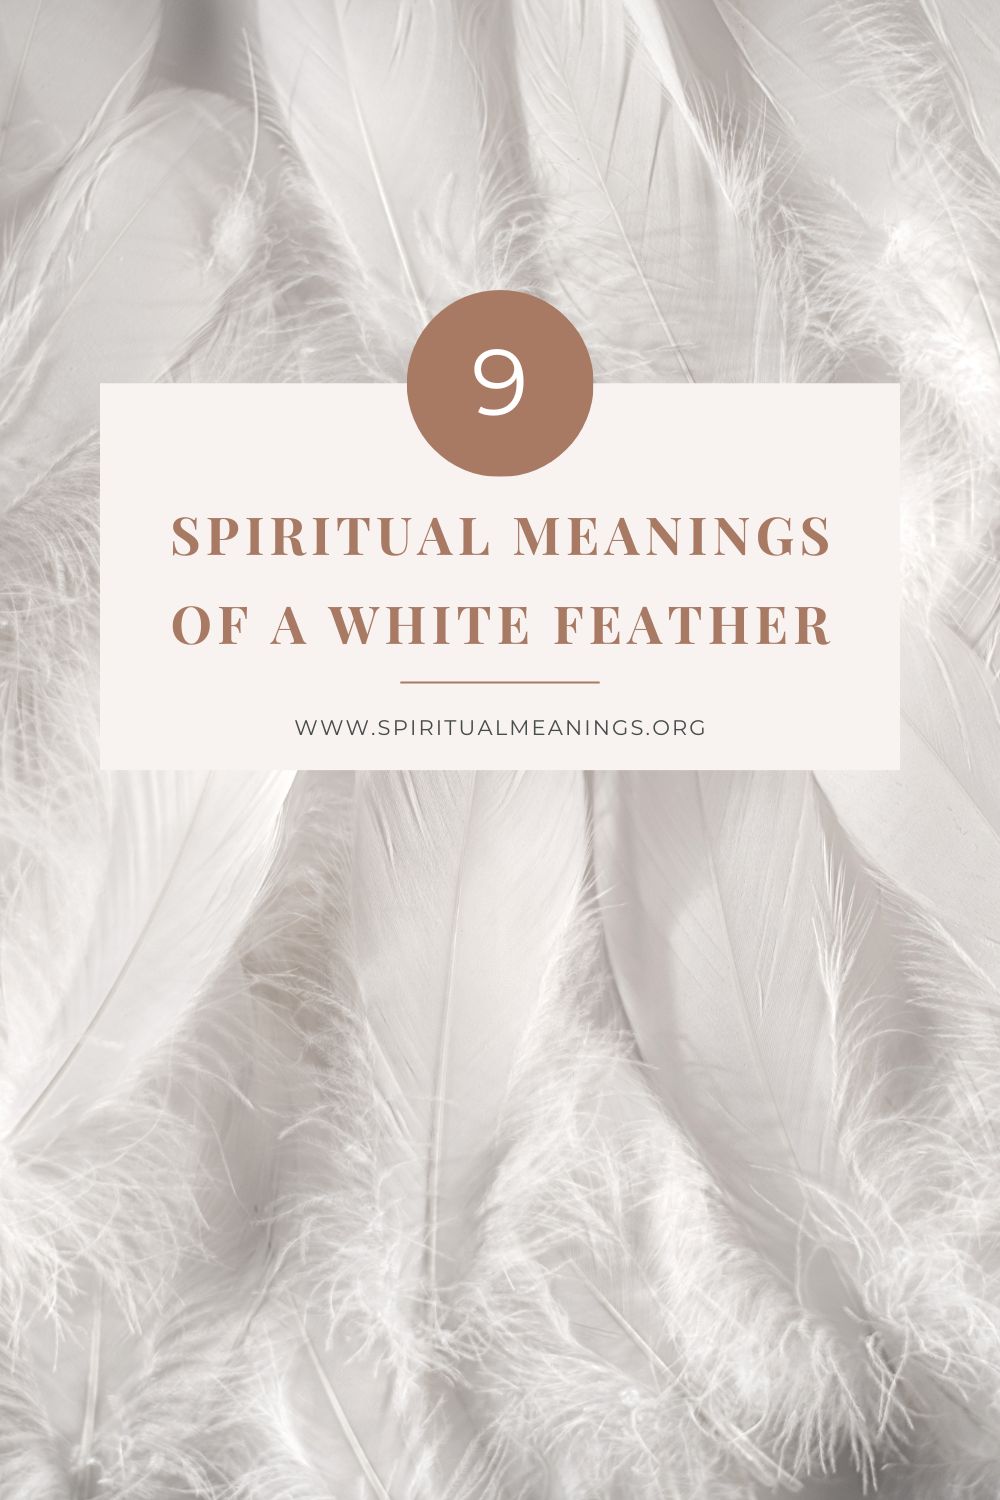 9 Spiritual Meanings of a White Feather